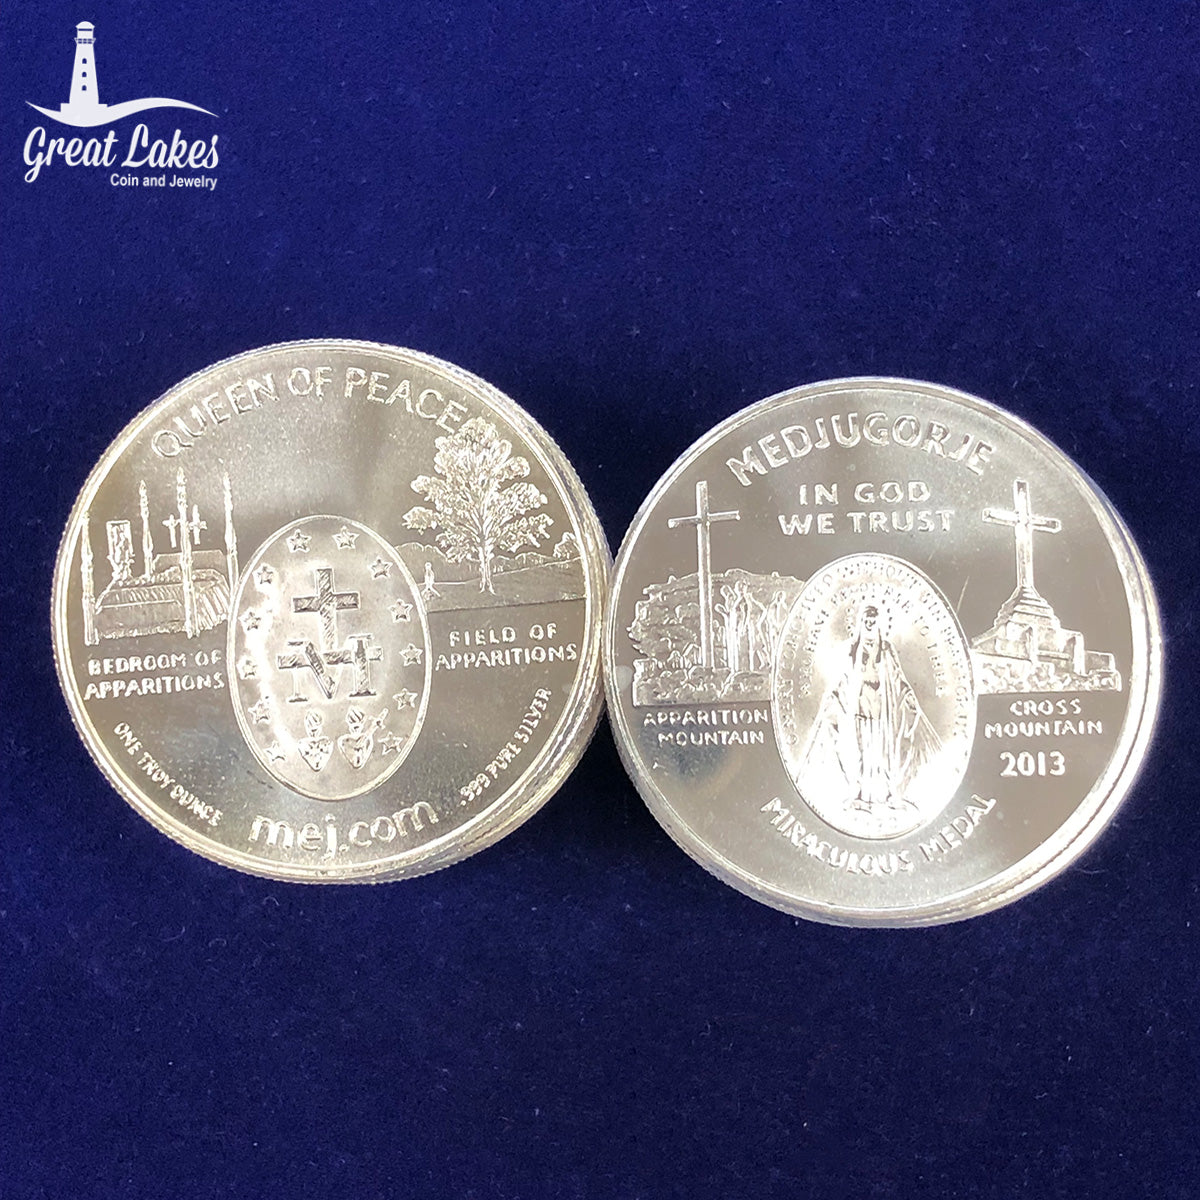 Miraculous Medal Medjugorje 1 oz Silver Round (Tube) (Secondary Market)